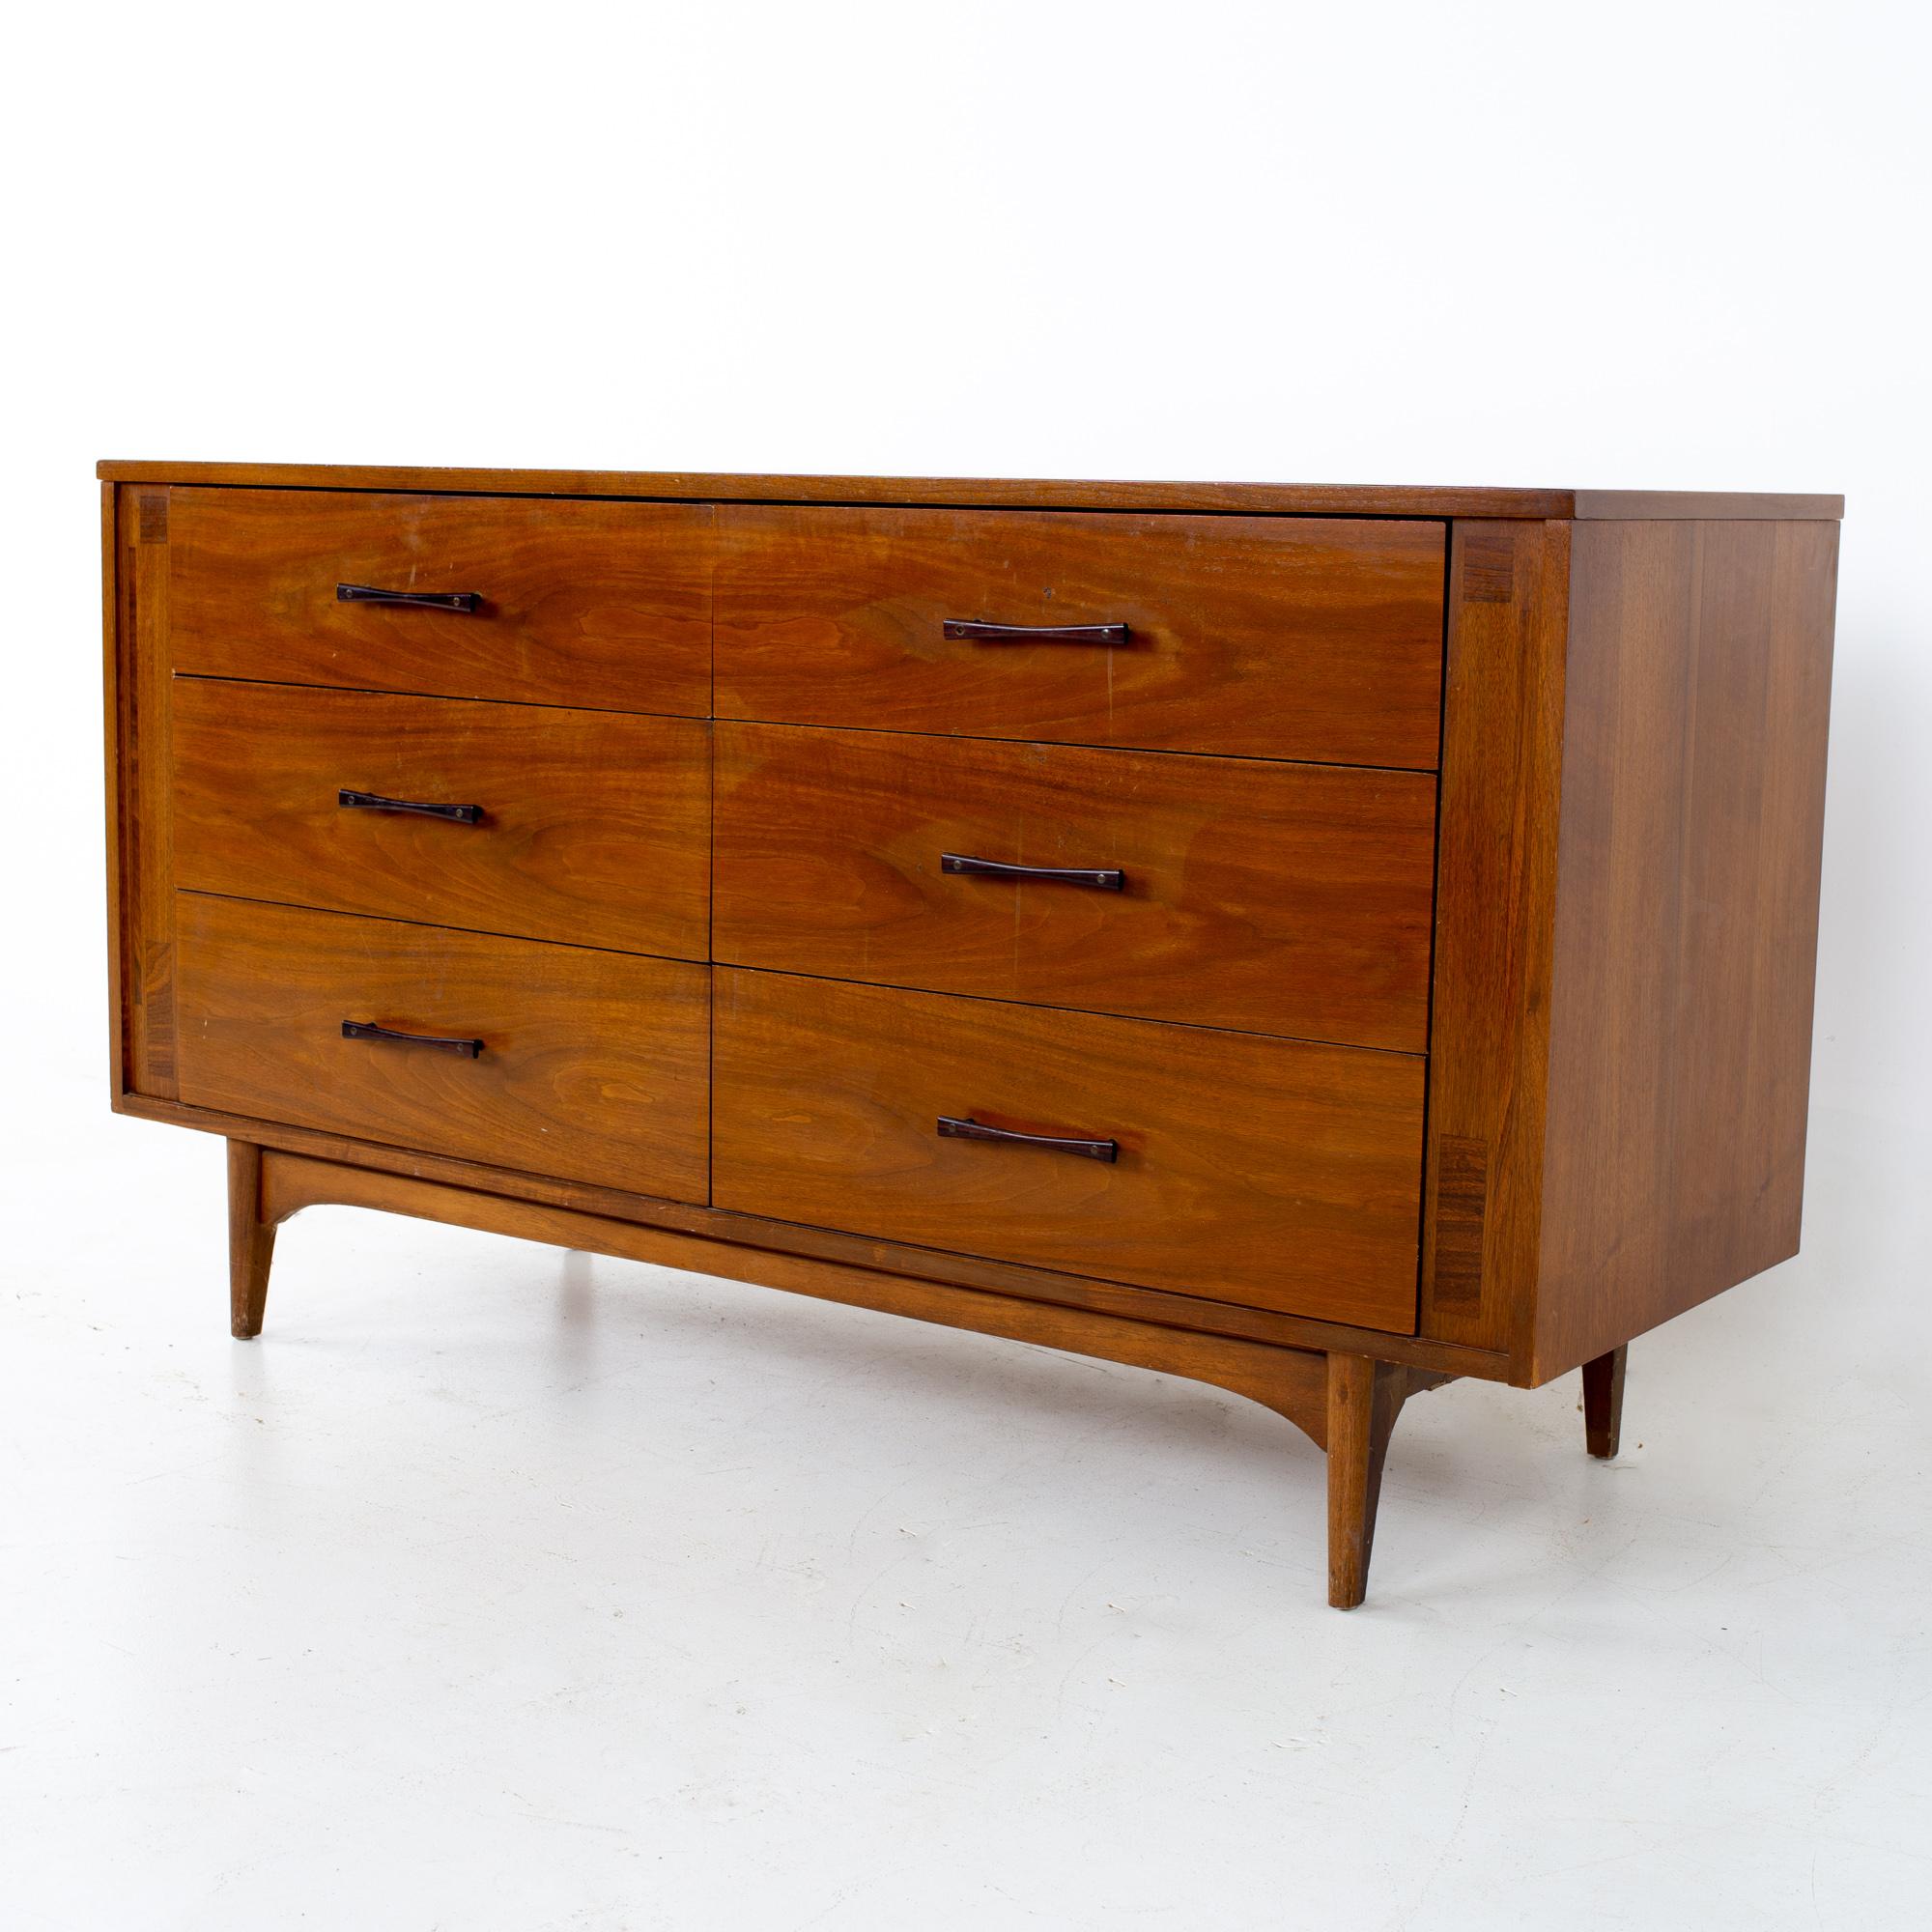 Paul McCobb Style Kroehler mid century walnut and rosewood 6 drawer dresser
Dresser measures: 56 wide x 19 deep x 30.75 inches high

All pieces of furniture can be had in what we call restored vintage condition. That means the piece is restored